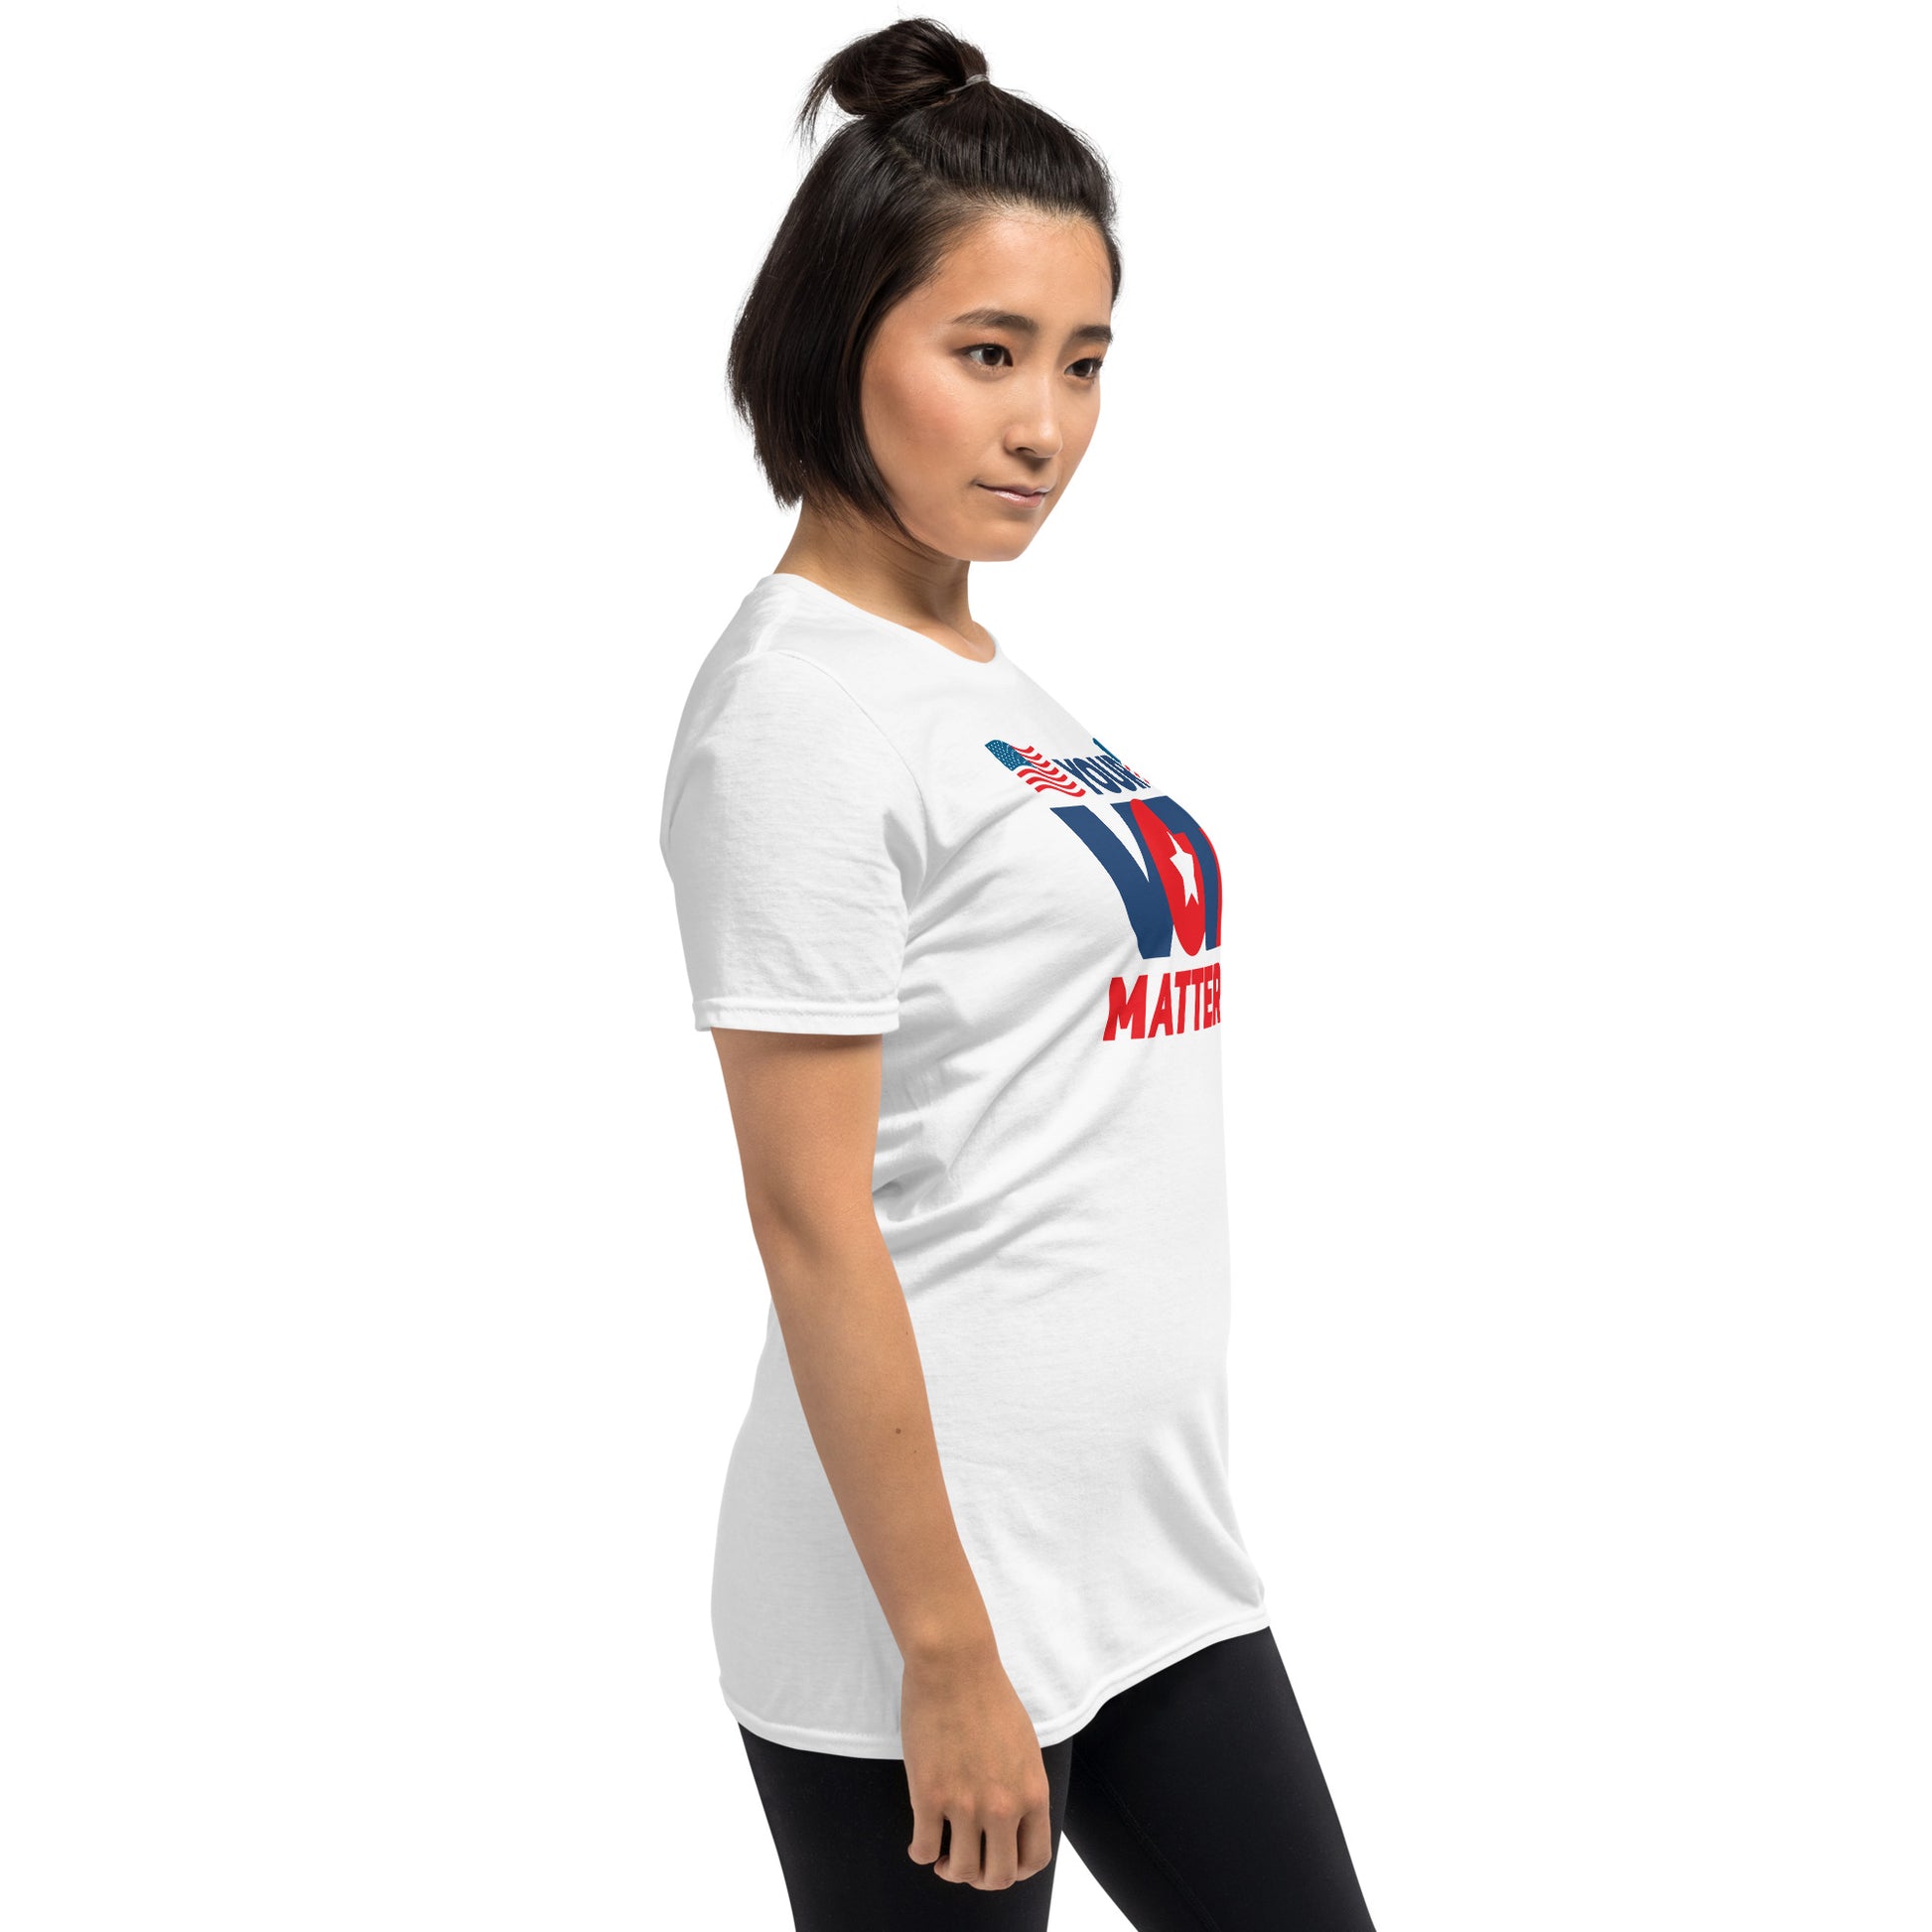 Stand Out in Style: Your Vote Matters Shirt